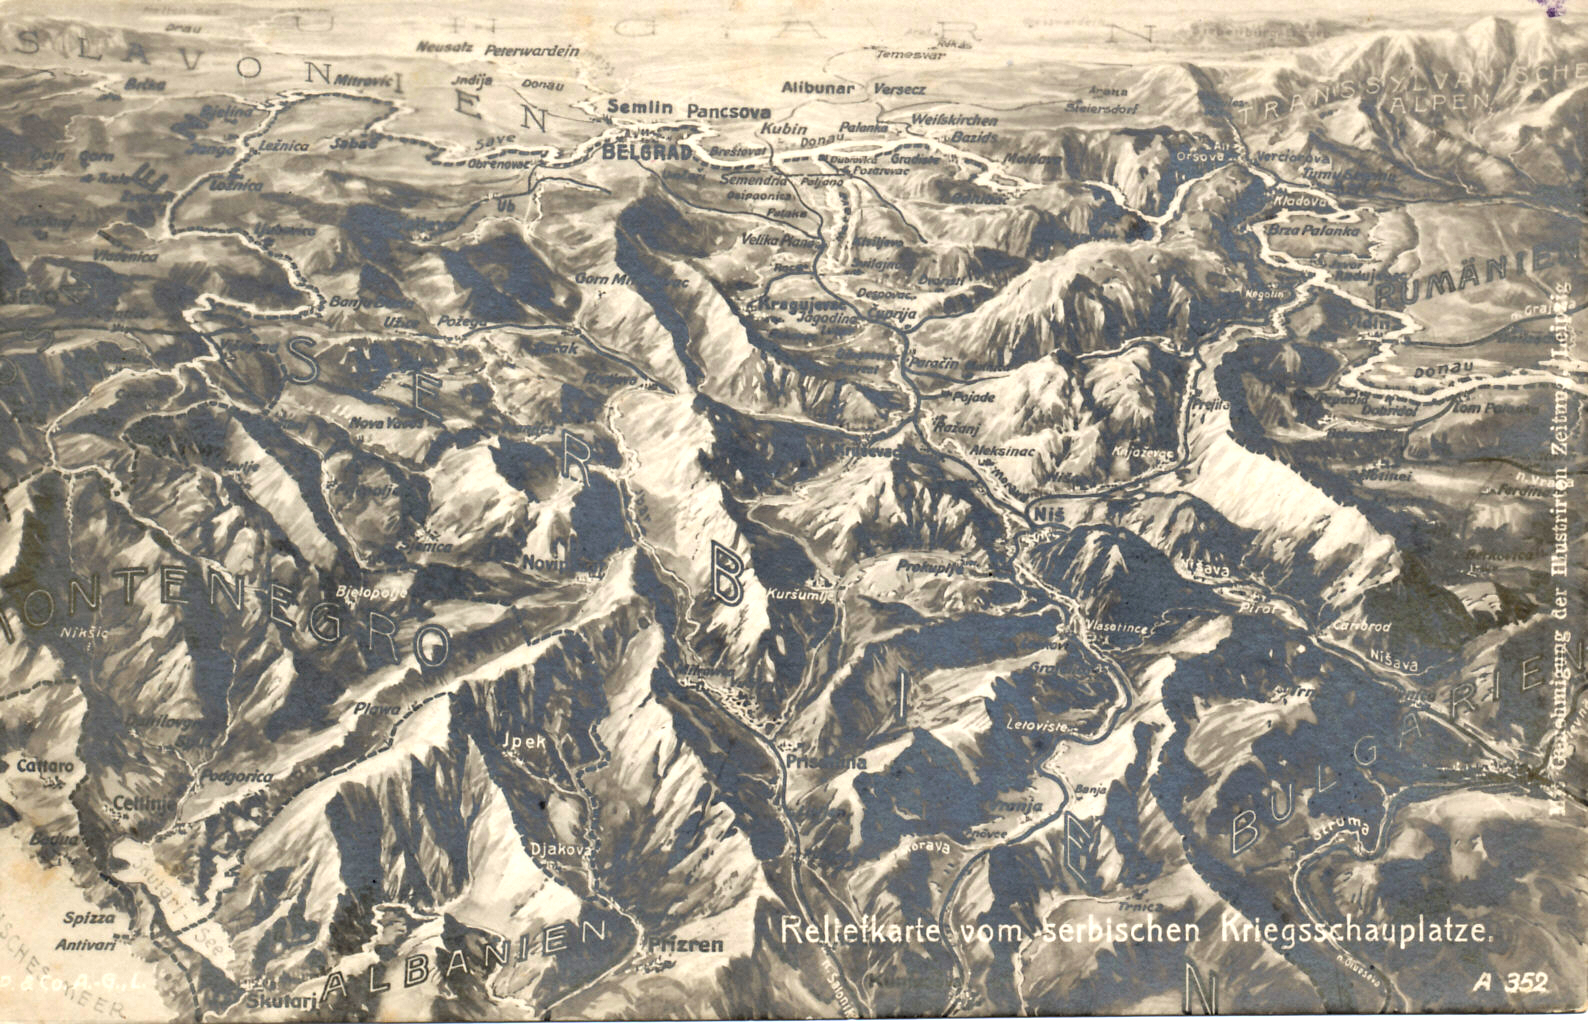 Balkan Front Postcard relief map of the Serbian Front. Although difficult to read, the following landmarks are legible and visible. The plains of Hungary are at the top immediately north of the Danube River and the Serbian capital of Belgrade. The Adriatic Sea is at the bottom left along the coasts of Montenegro and Albania. To the east, south to north, are Bulgaria, Romania, and the Transylvanian Alps. Serbian landmarks include the city of Nisch, and the valleys of the Struma . . .
Text:
Reliefkarte vom serbischen Kriegsschauplatze
A 352
Mit Genehmigung der Illustrirten Zeitung Leipzig
Relief map of the Serbian theater of war
A 352
With permission of the Illustrirten Zeitung Leipzig